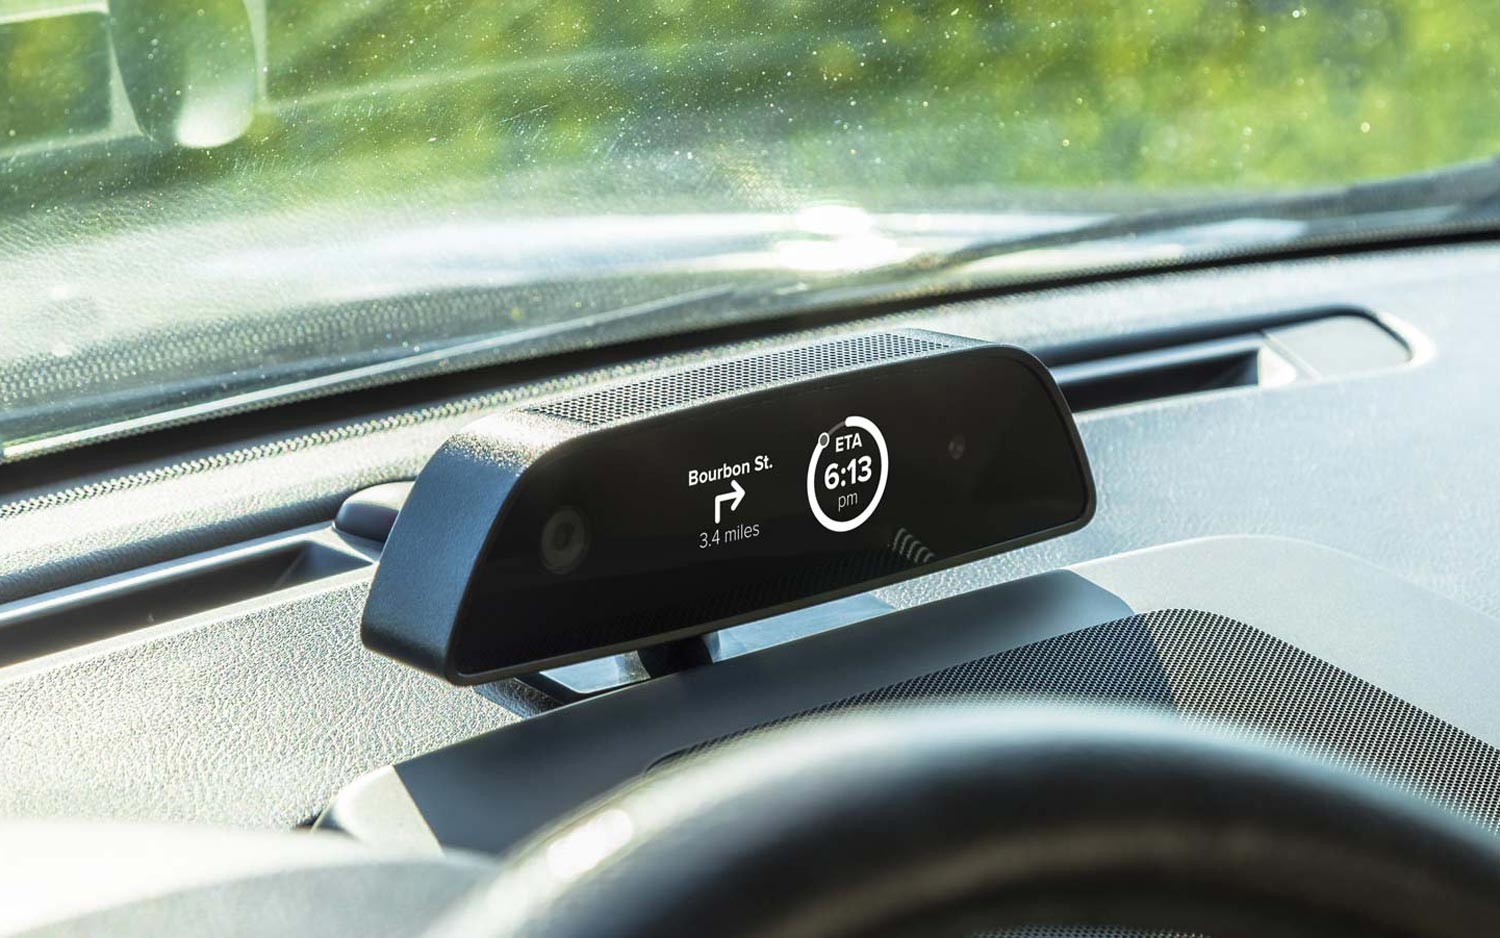 8 Great Gadgets to Upgrade Your Next Road Trip [SPONSORED